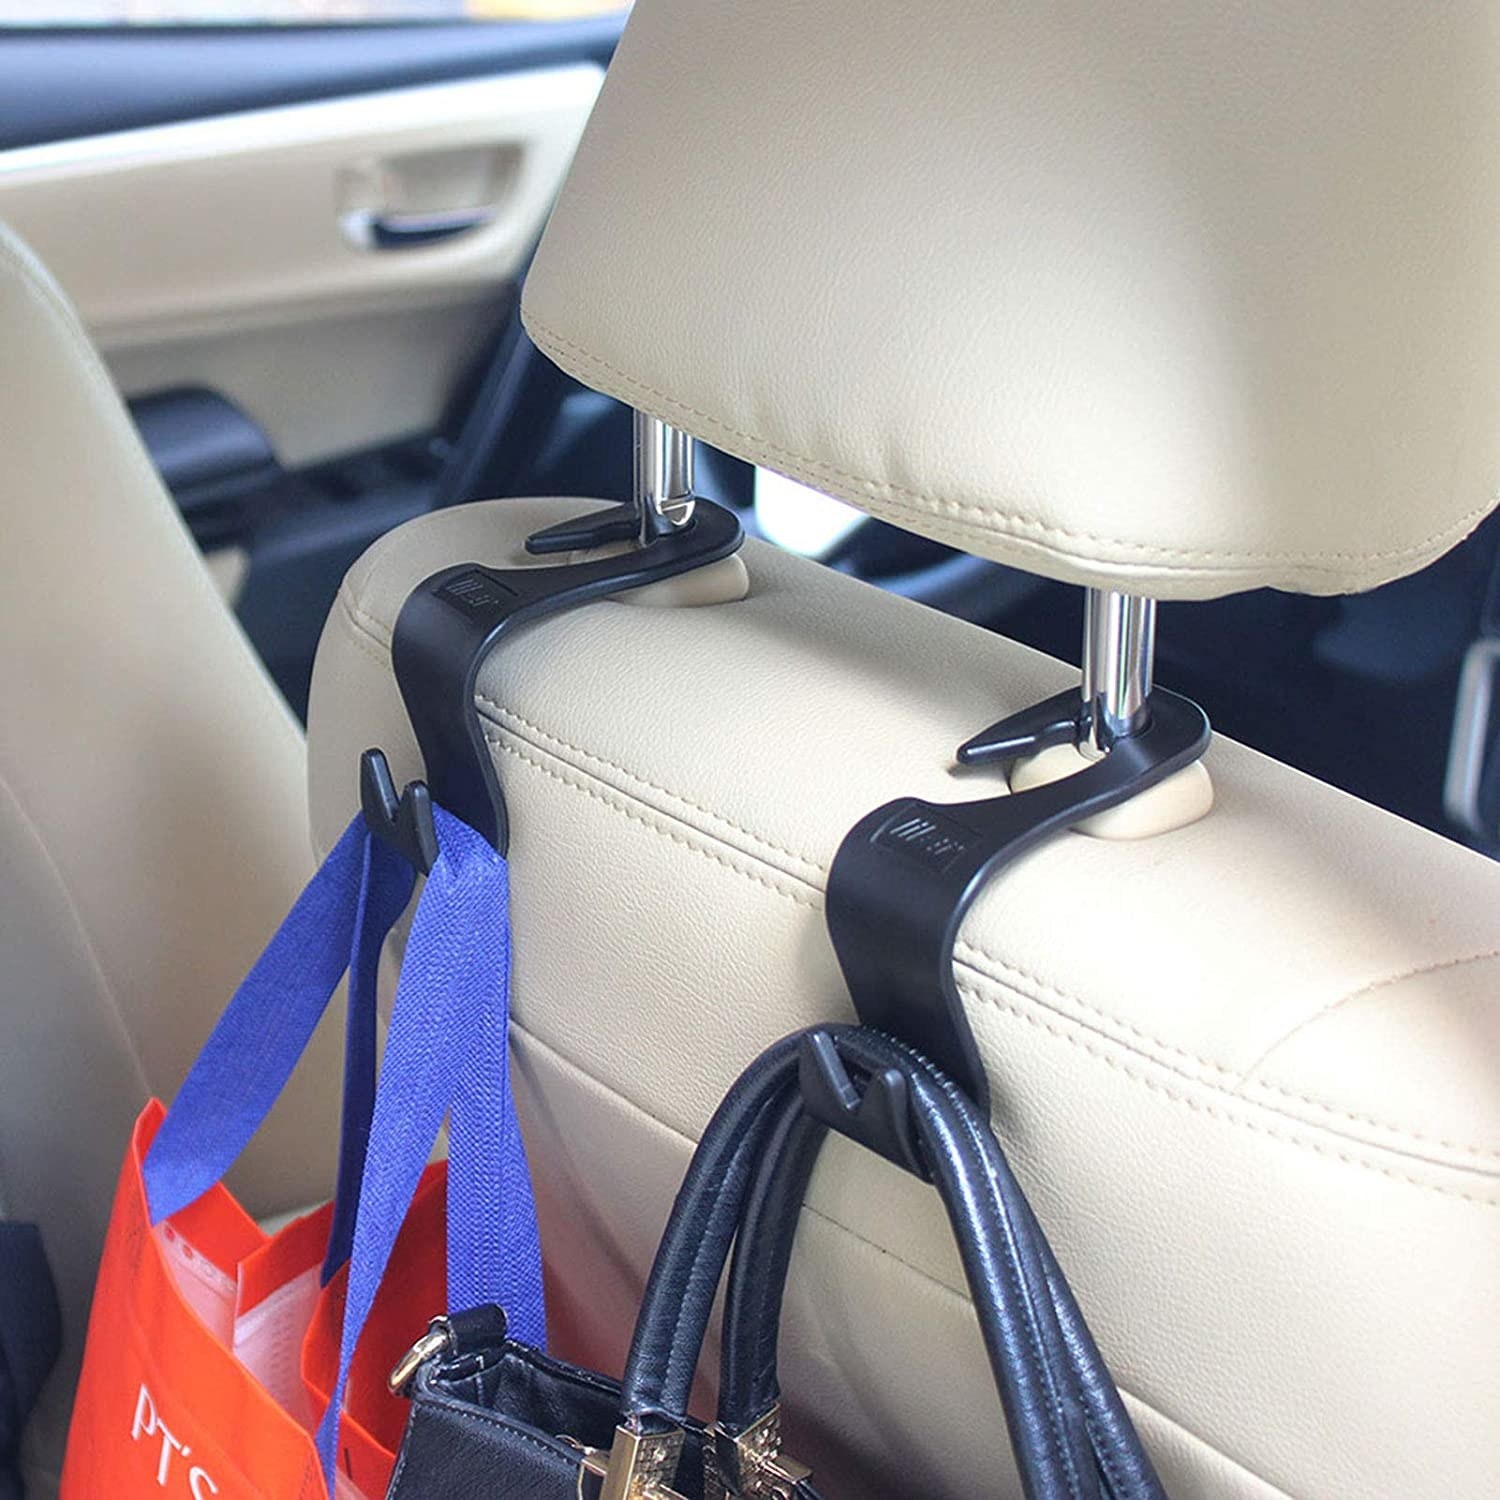 the hooks on the back of a headrest holding bags